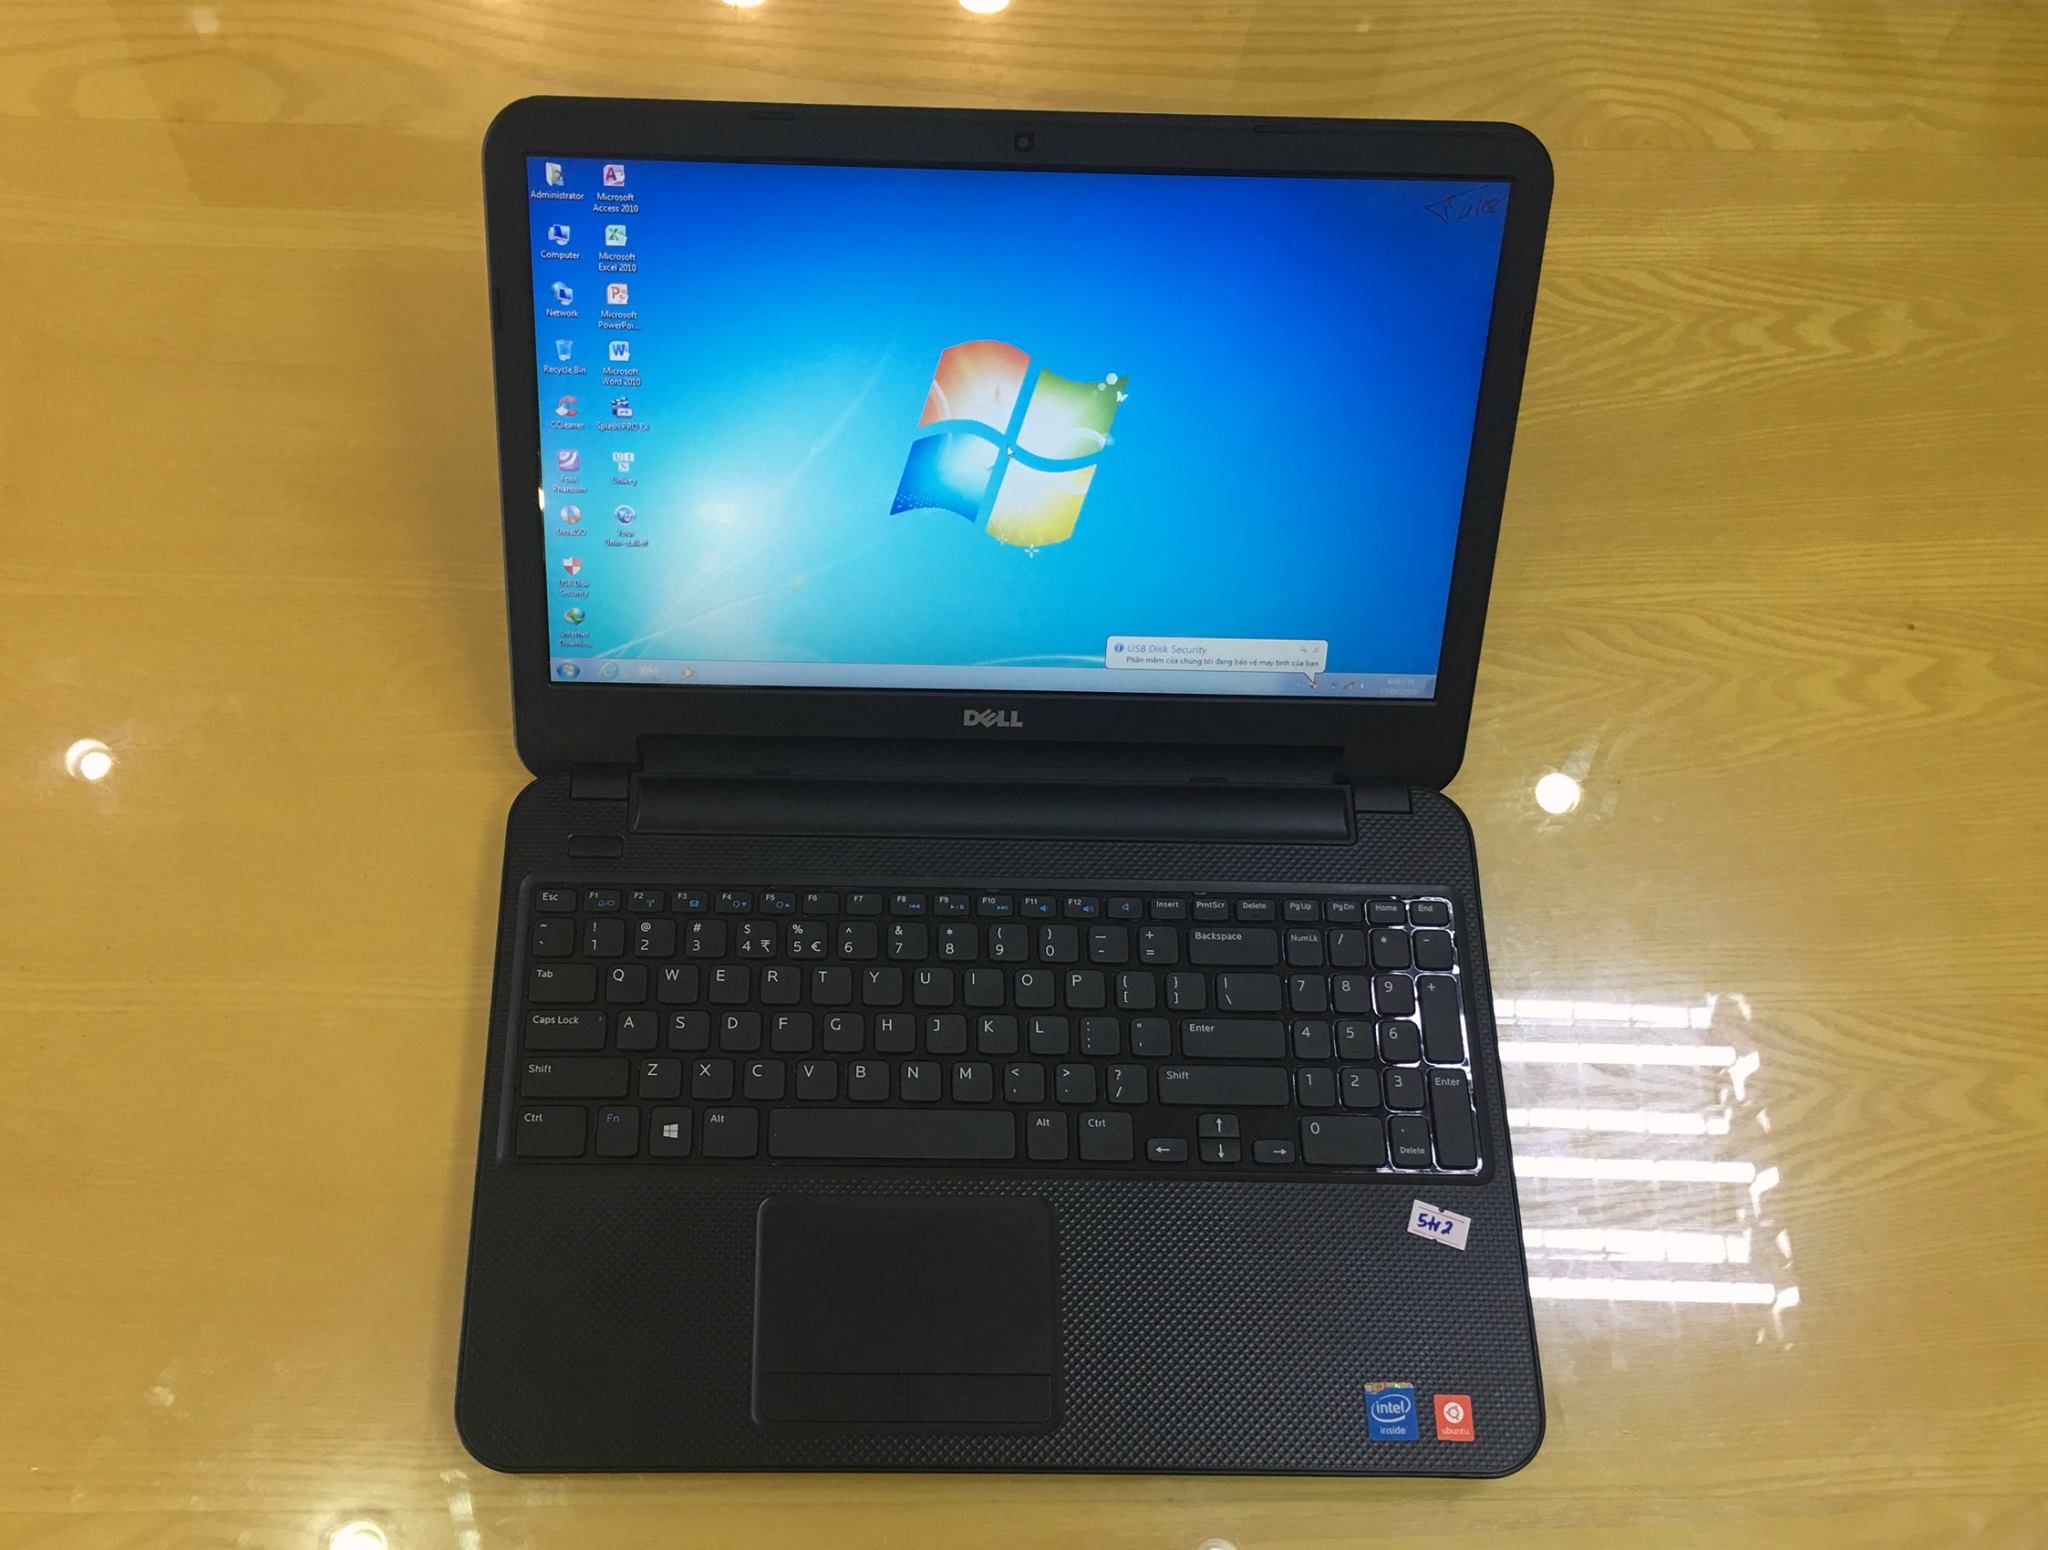 LAPTOP DELL INSPIRON N3537 HASWELL.jpg